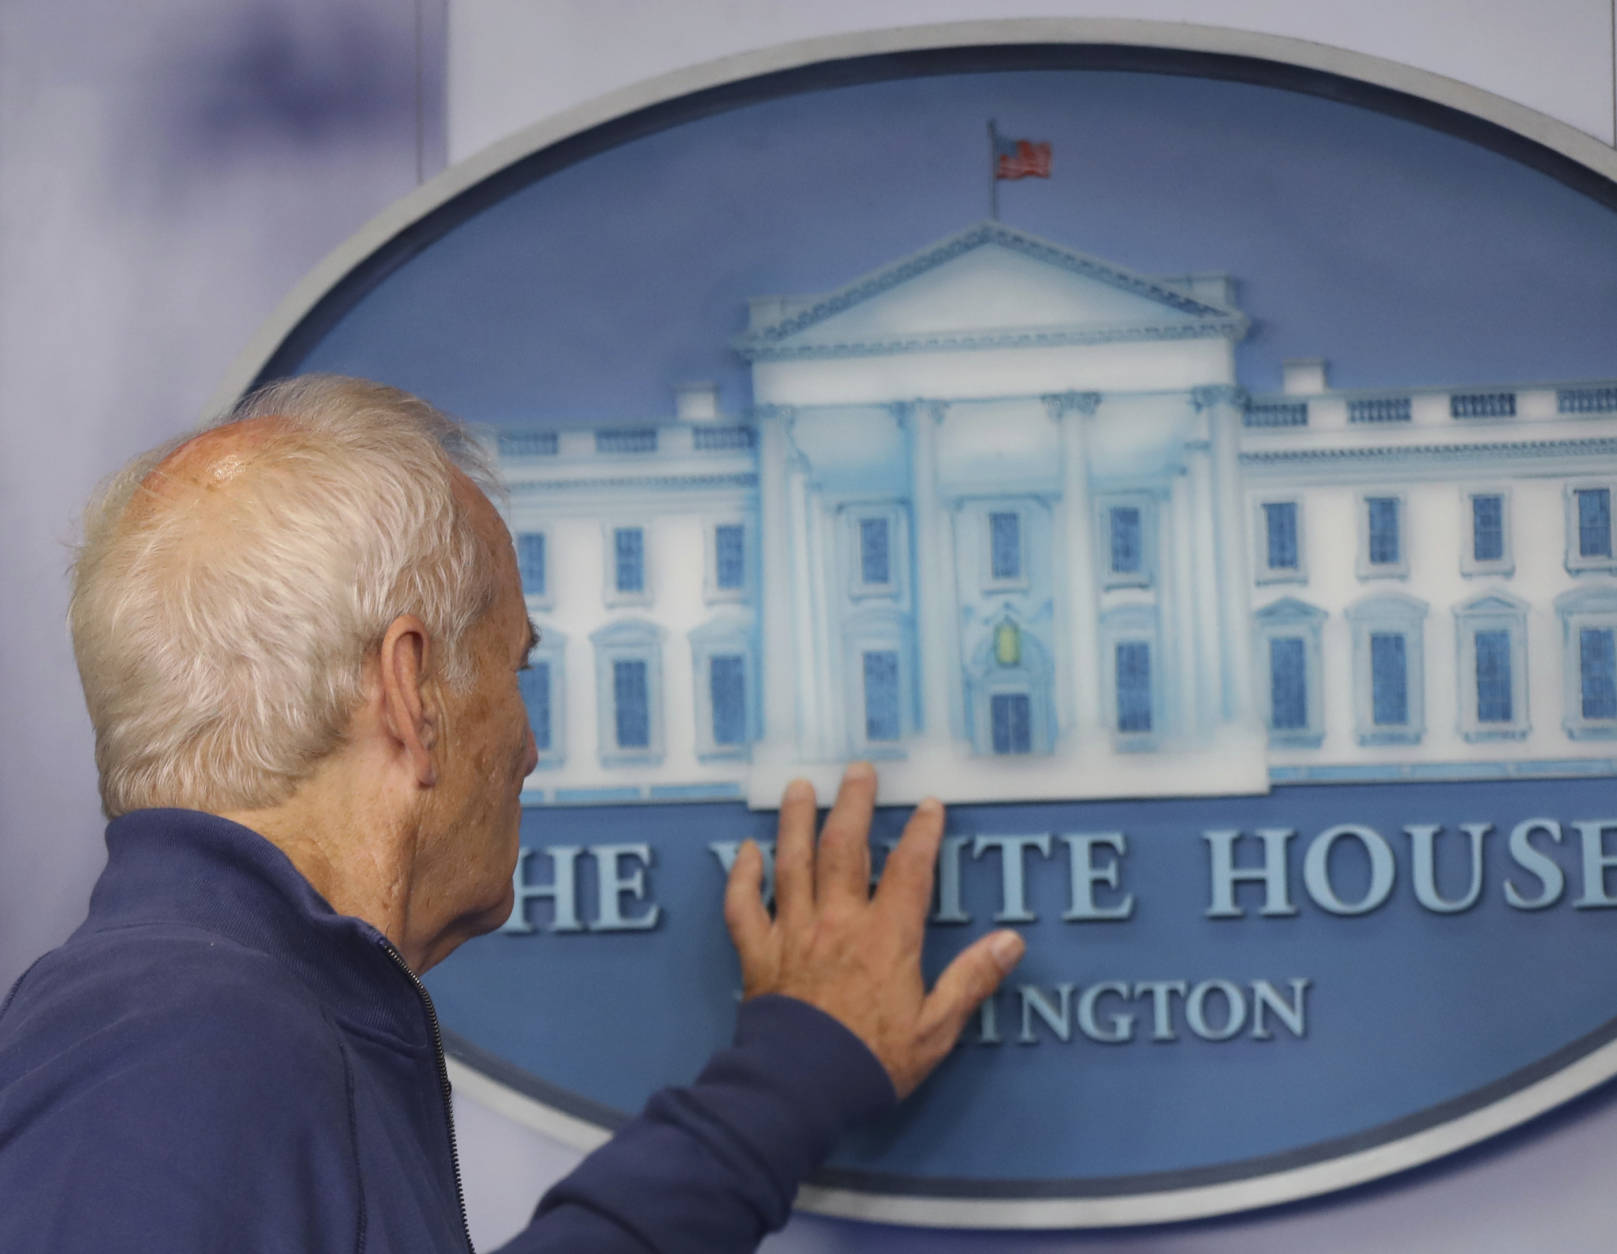 Actor Bill Murray touches to White House sign during a brief visit in the Brady Press Briefing Room of the White House in Washington, Friday, Oct. 21, 2016. Murray is in Washington to receive the Mark Twain Prize for American Humor.  (AP Photo/Manuel Balce Ceneta)